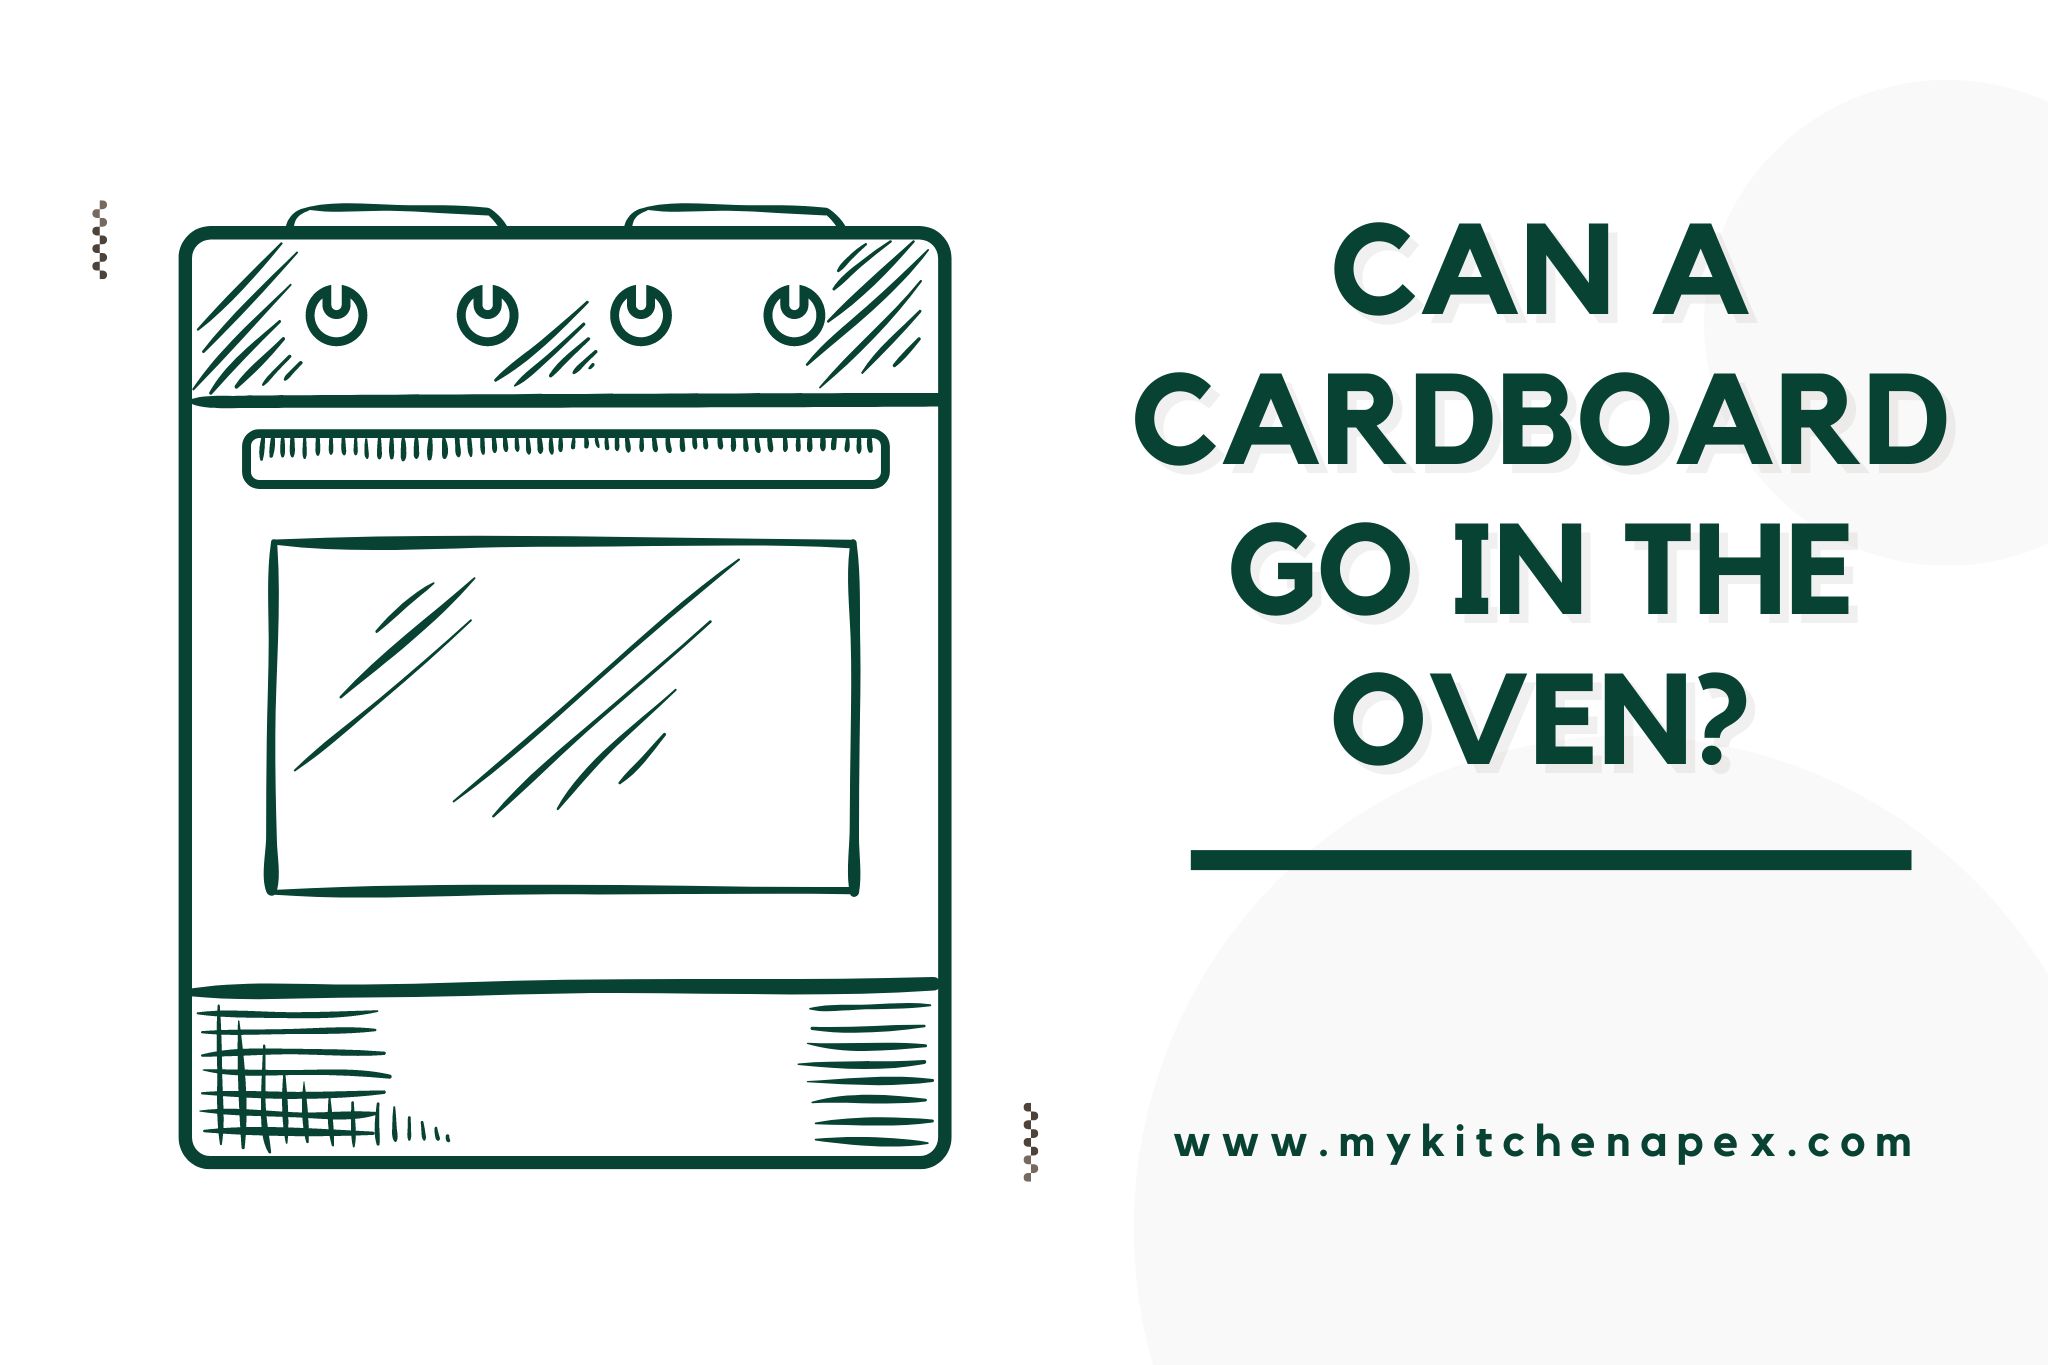 Can a cardboard go in the oven?